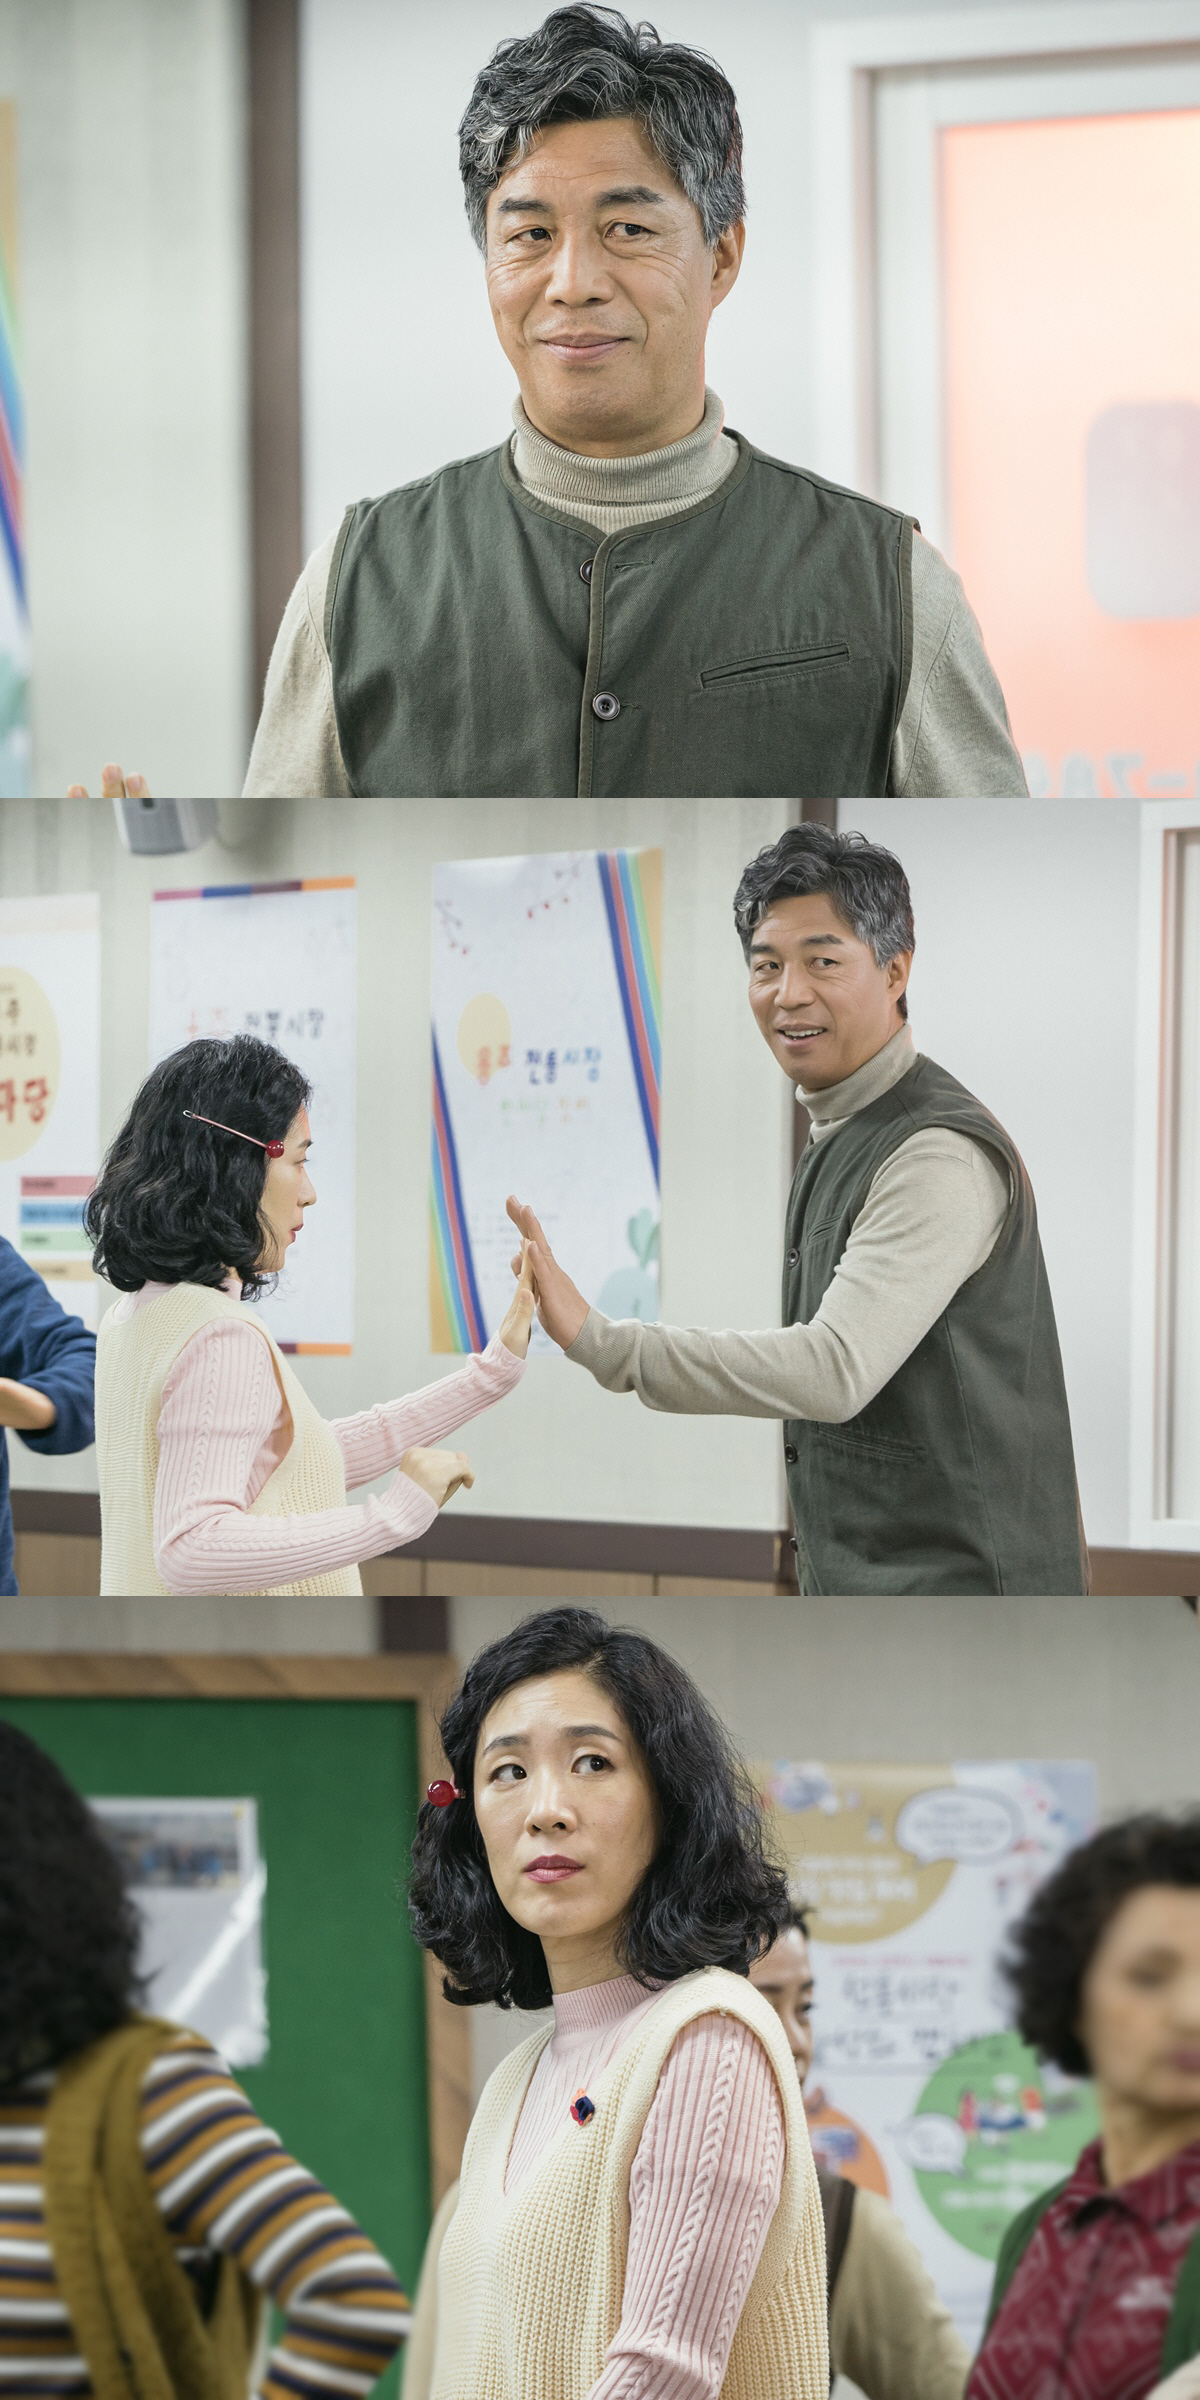 Ahn Gil-Gang and Baek Ji Won show off their growling chemi in Ive been there once.KBS 2TVs new WeekendDrama, scheduled to be broadcast at 7:55 pm on March 28 (Saturday), is raising expectations for the broadcast by releasing the images of Ahn Gil-Gang (Yang Chi-soo Station) and Baek Ji Won (Jung Ok-ja Station) at Ive Goed Once.I have been to once is a pleasant and warm drama that completes the search for happiness through the process of overcoming the gap and crisis of divorce between parents and children.Ahn Gil-Gang is a friend of Song Young-dal (Chun Ho-jin) and the butchers owner, Yang Chi-soo, and Baek Ji Won is the younger brother of Jeong Ok-bun (Cha Hwa-yeon) and the owner of cute charm, Old Miss Jung Ok-ja.The two people, who are appearance ground-based from the face, are not interested in each other and will give a smile to viewers with a growling look.Above all, the two of them are showing off their love for the love that can not be hated by emitting the energy of Nam Sachin and Mothers Chin.In the public photos, Ahn Gil-Gang and Baek Ji Won are caught in an unusual confrontation.The subtle meeting of Ahn Gil-Gang, who is smiling and looking at his partner Baek Ji Won in front of him, and Baek Ji Won, who is looking at him like that, was captured.Especially, the two peoples misguided gaze forms a breathtaking air current.So, the two men and women who are already bloody are raising the curiosity of prospective viewers about what story is hidden.On the other hand, KBS 2TV new WeekendDrama I went once is Drama Knowing Wife, Weightlifting Fairy Kim Bokju, Oh!Lee Jae-sang, a strong player of Weekend Drama, is raising the credibility of the drama fans with his works by Yang Hee-seung, who wrote My Ghost, My father is strange, Son of Sol Pharmacy and I believe in love.The tit-for-tat chemistry that Ahn Gil-Gang and Baek Ji Won will be held on March 28th (Saturday) at 7:55 pm KBS 2TV new WeekendDrama I have been to once.